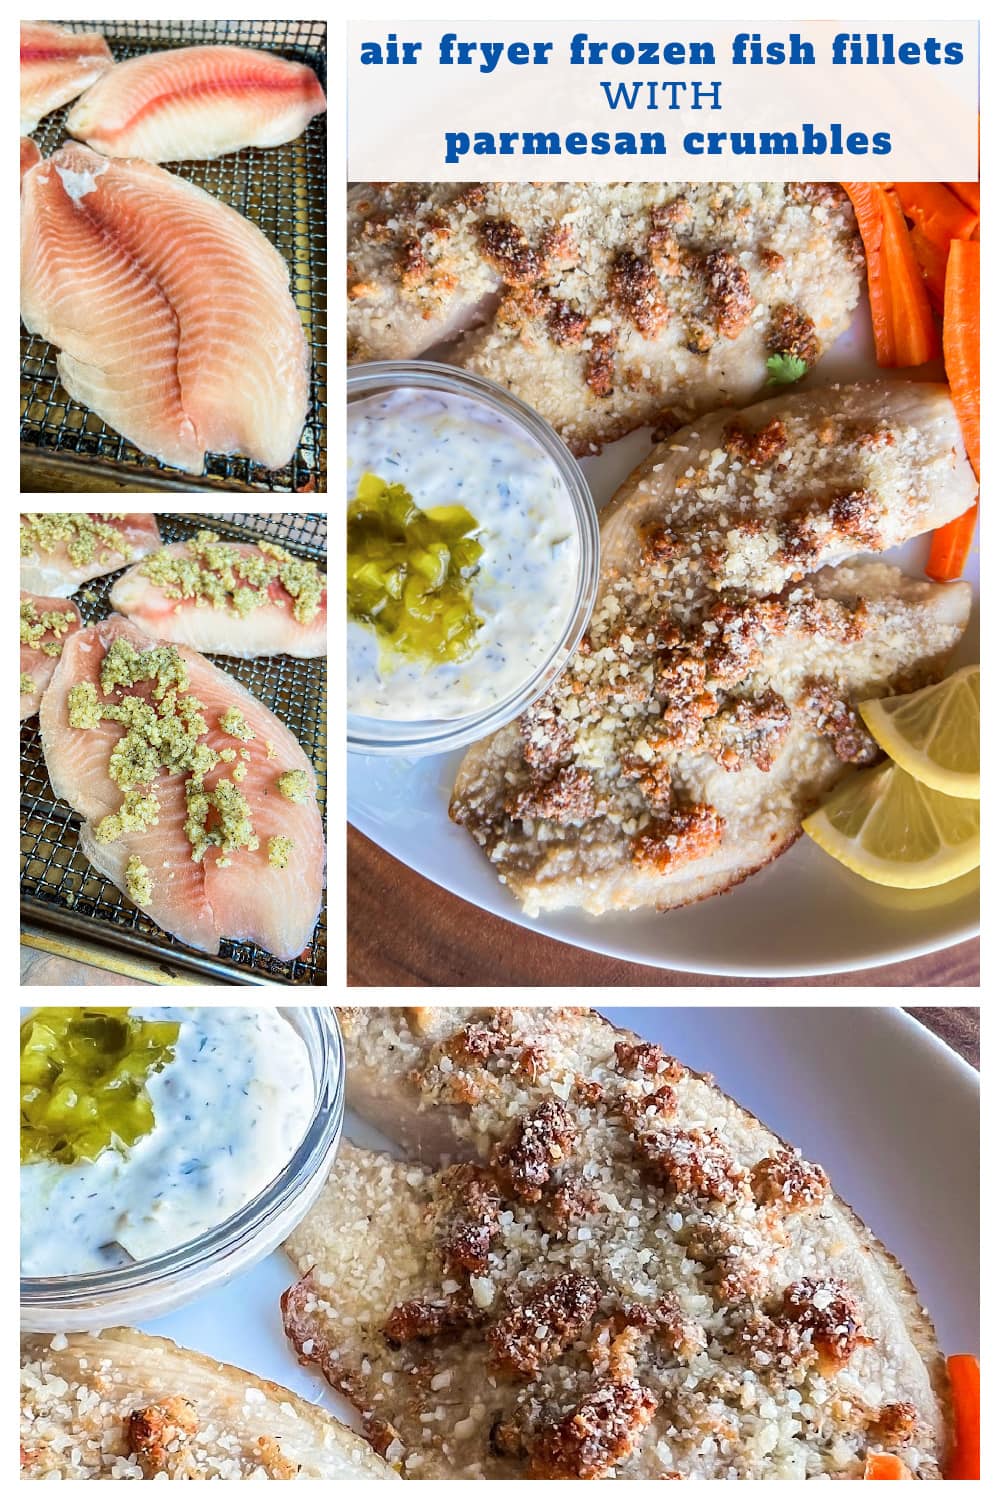 Easy to make air fryer frozen tilapia with parmesan crumbles and tartar sauce